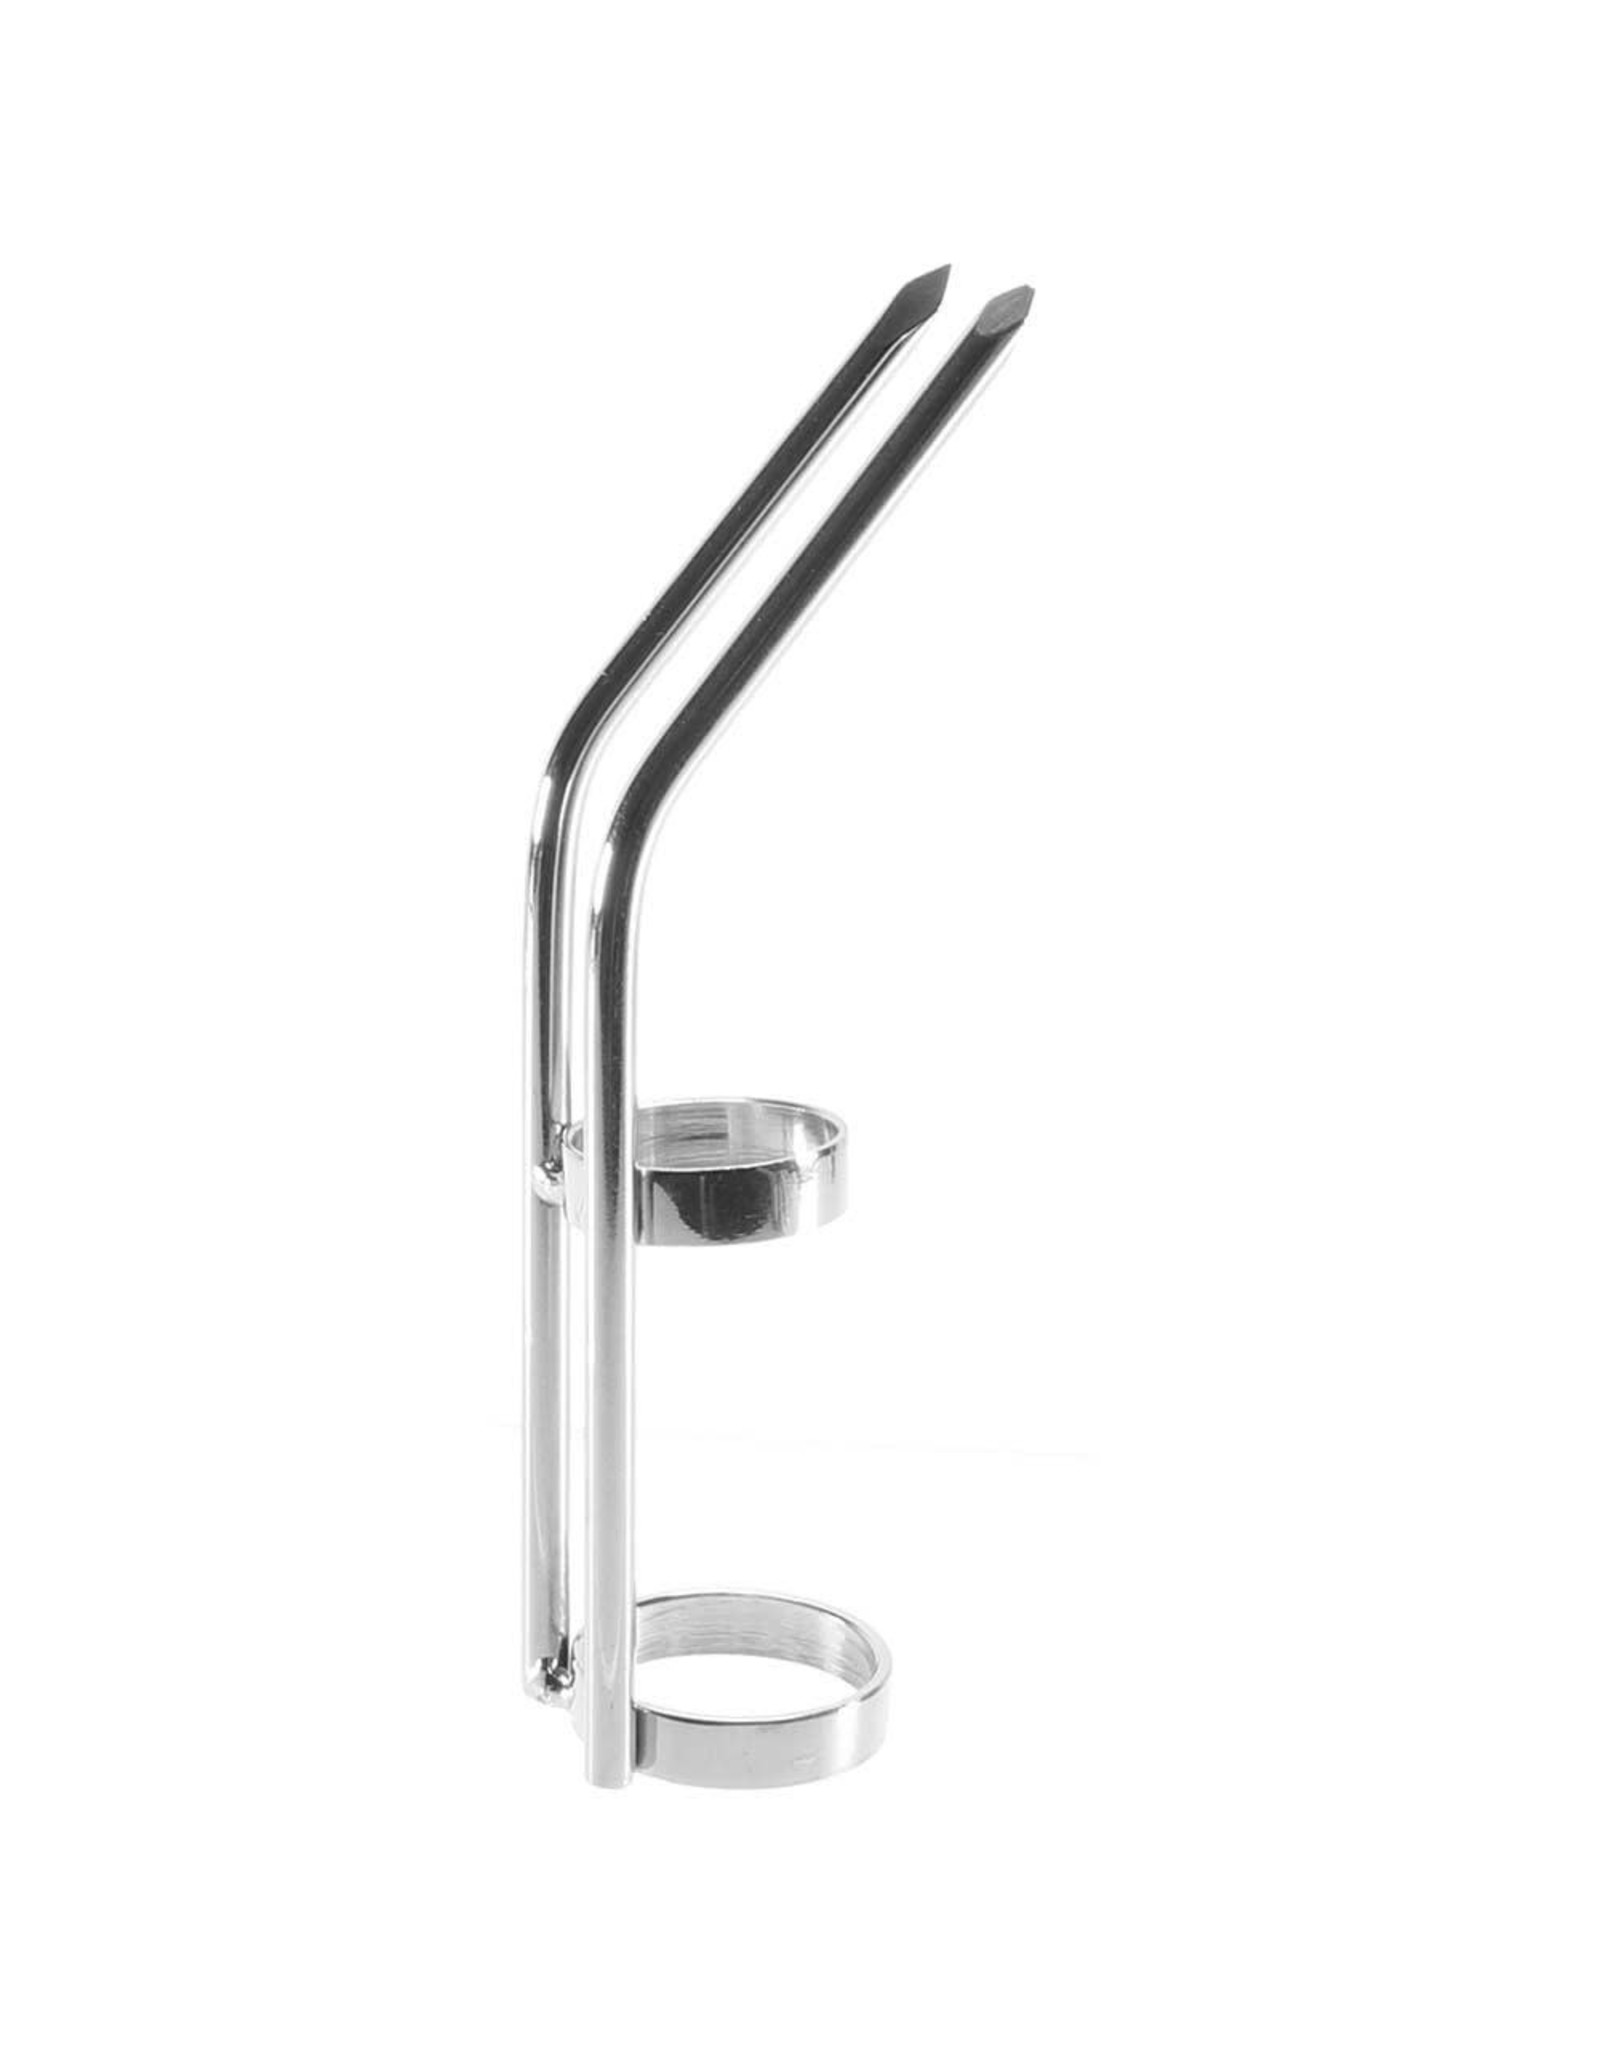 Stainless Steel Cat Claw